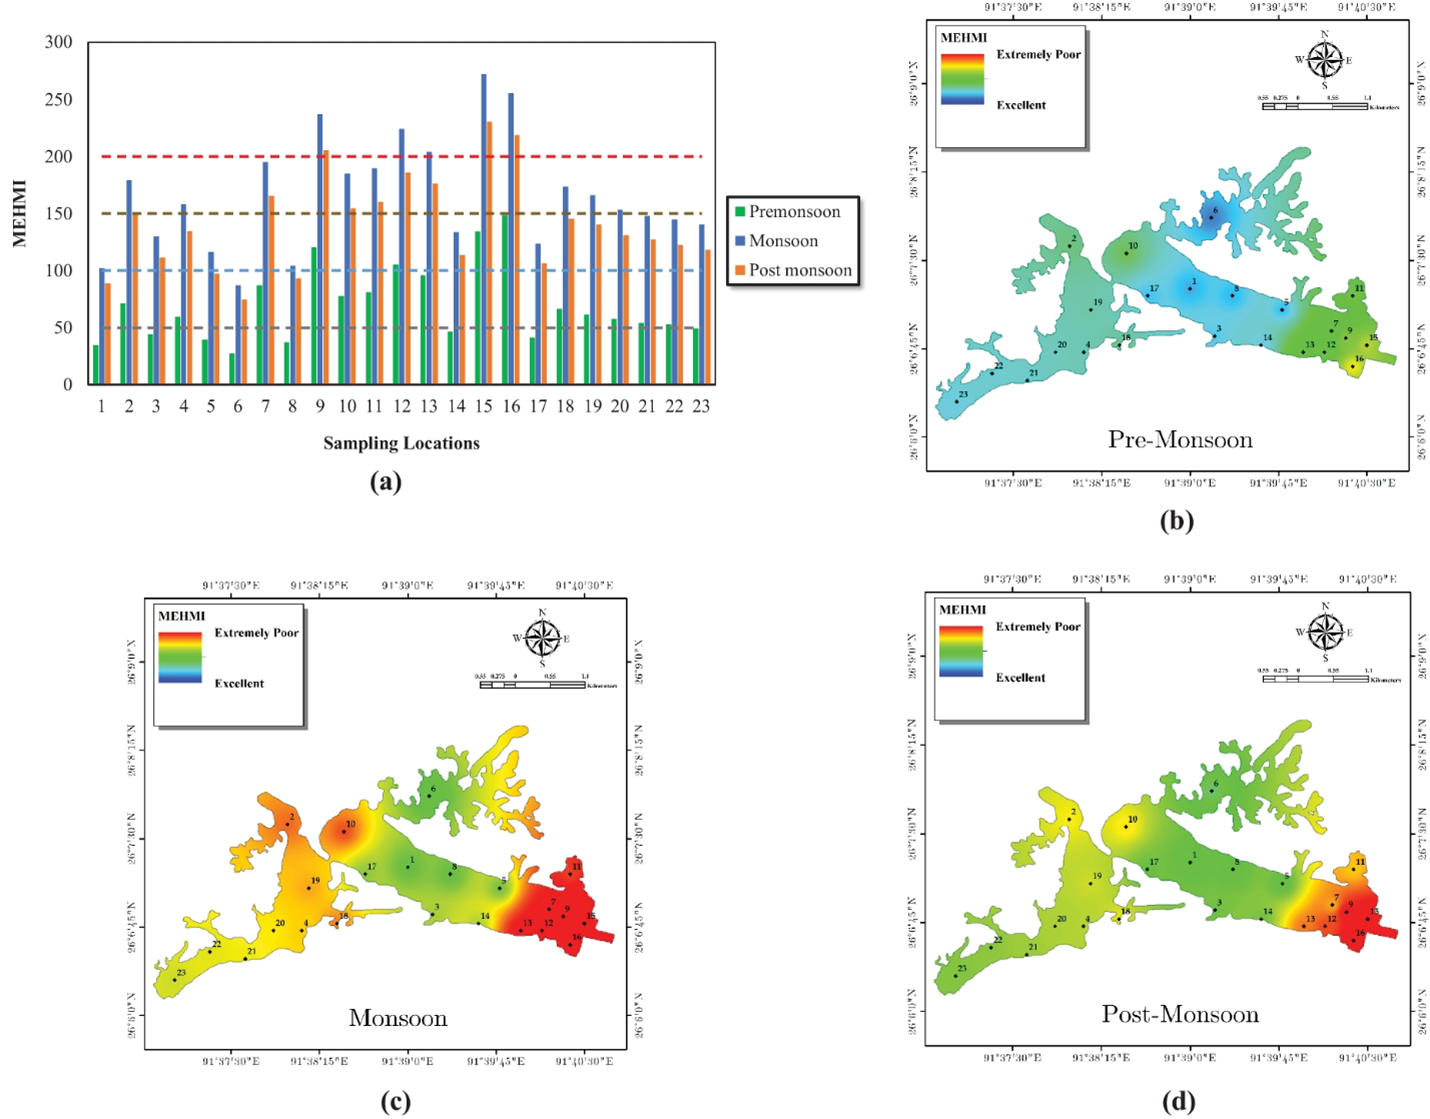 Employing Information Entropy in Determining the Water Body’s Health Status